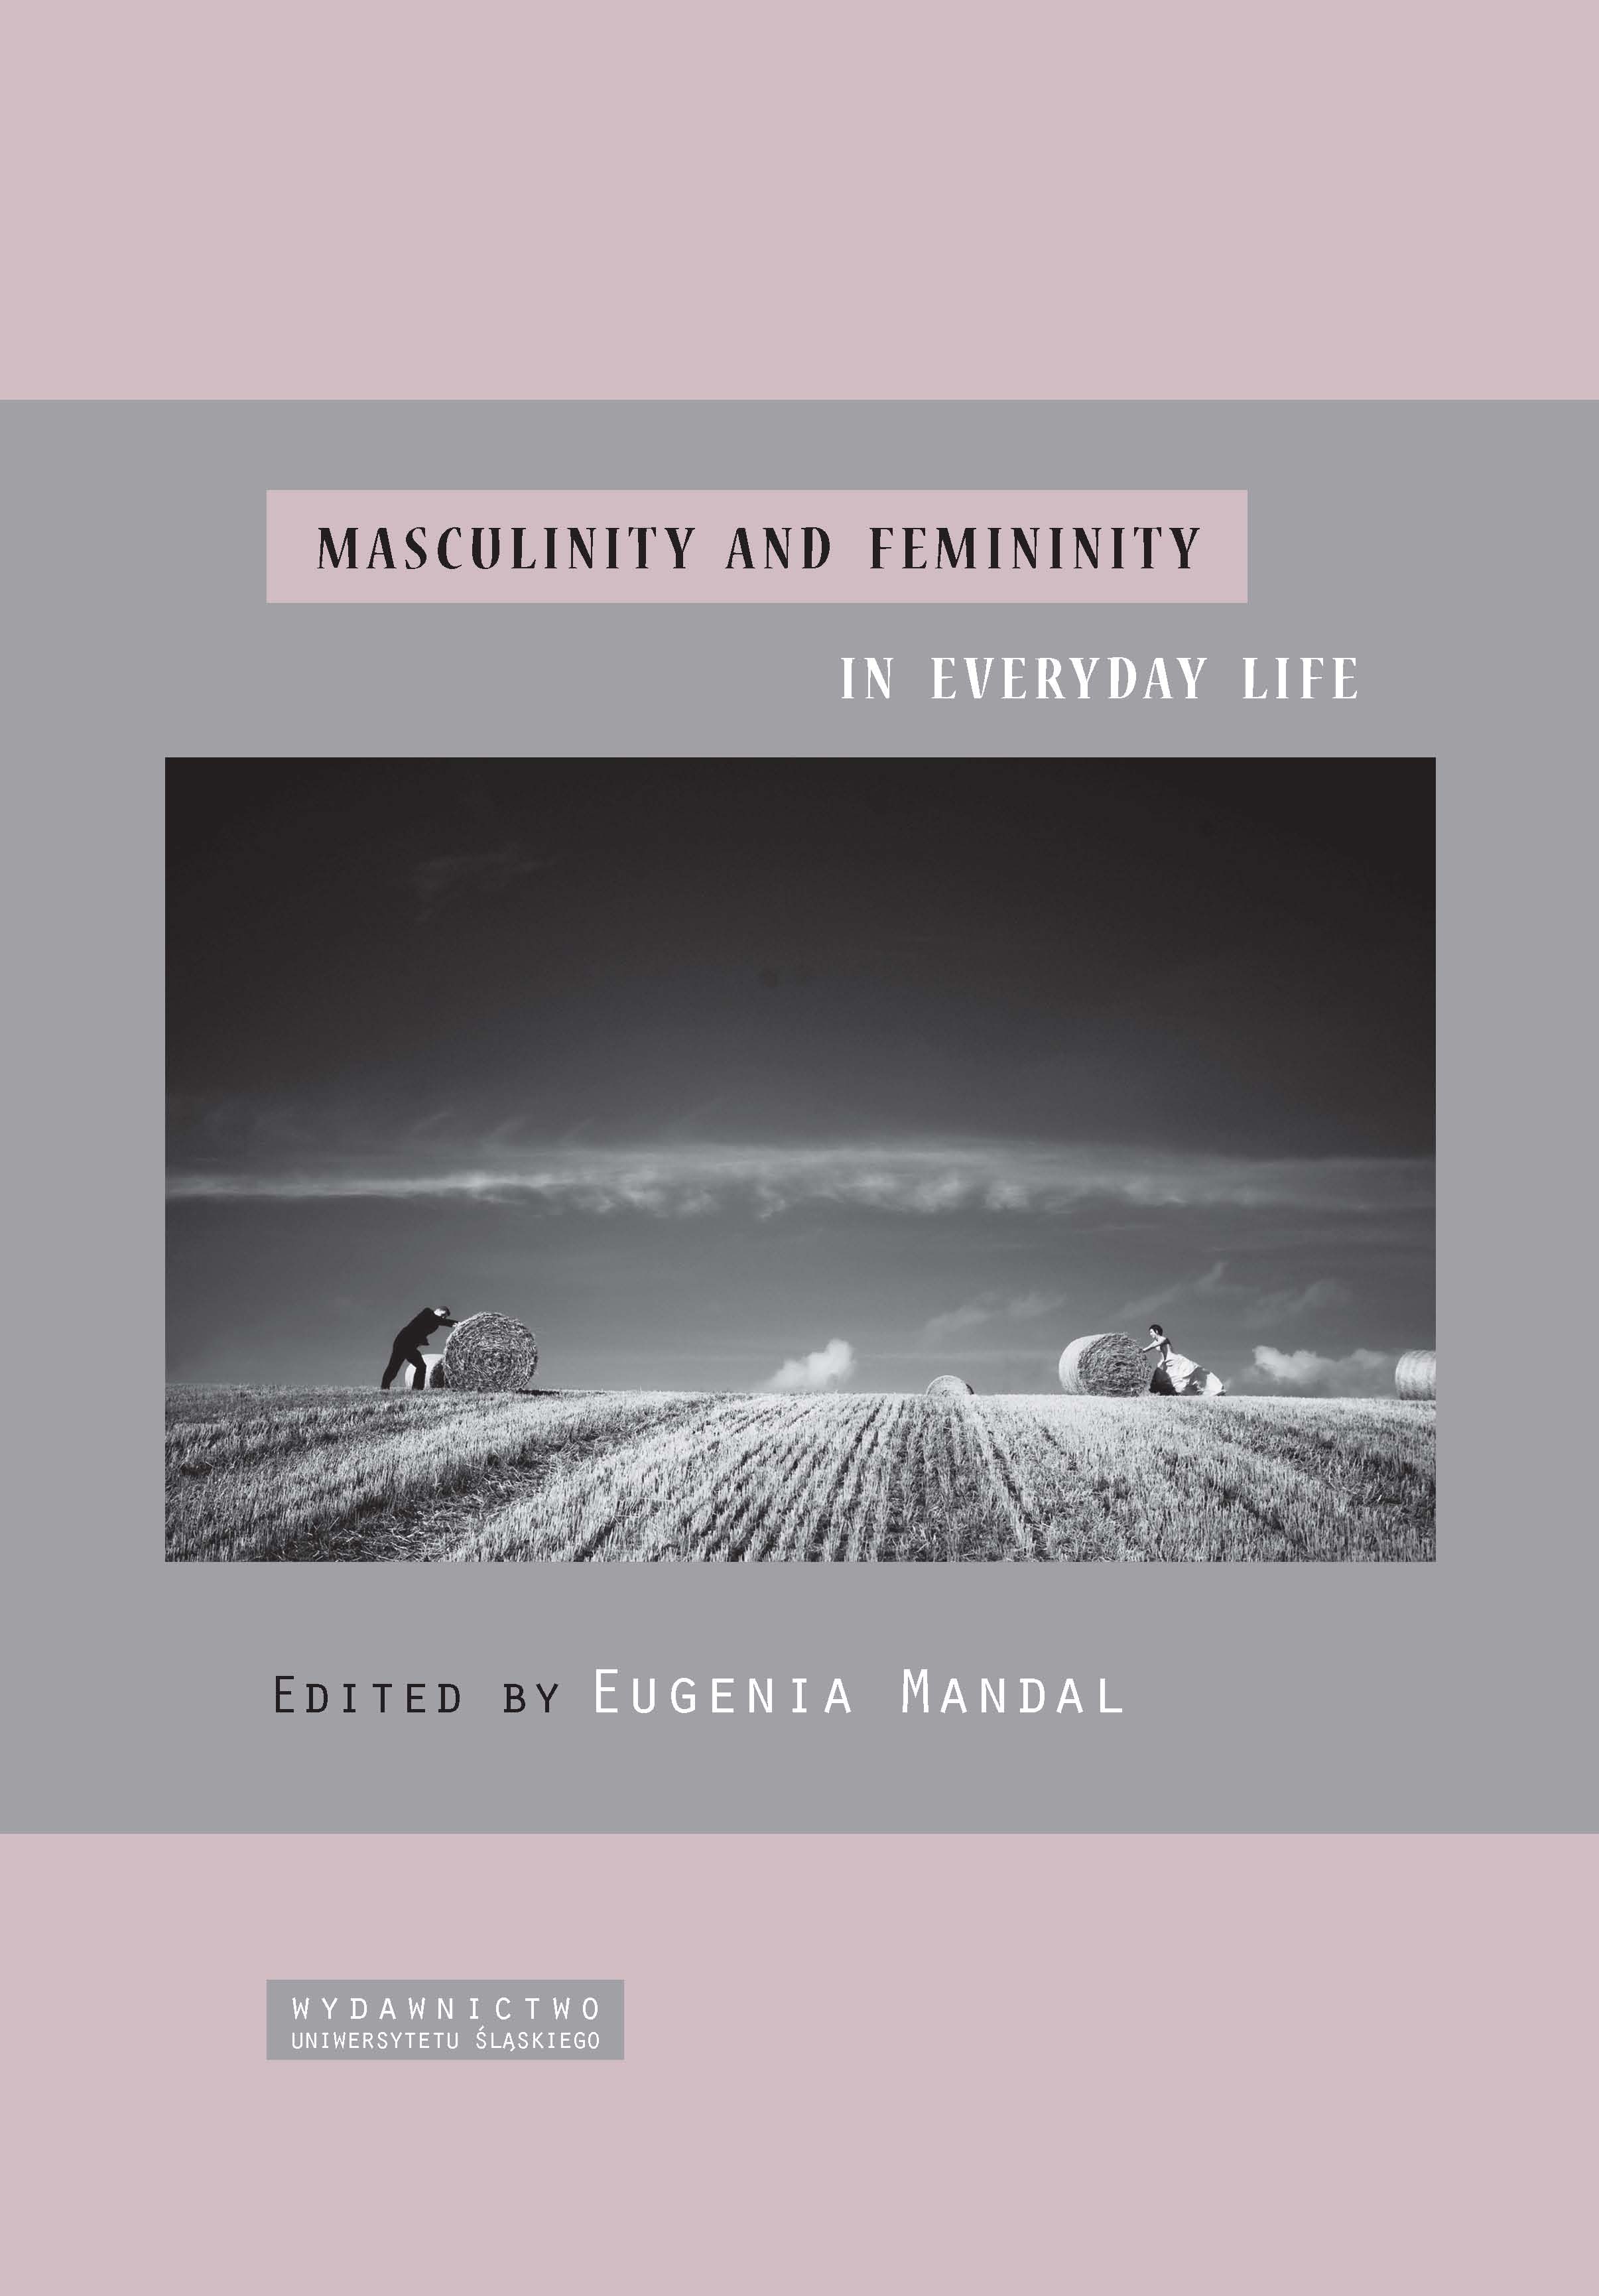 Drive for muscularity as men’s body image determinant Cover Image